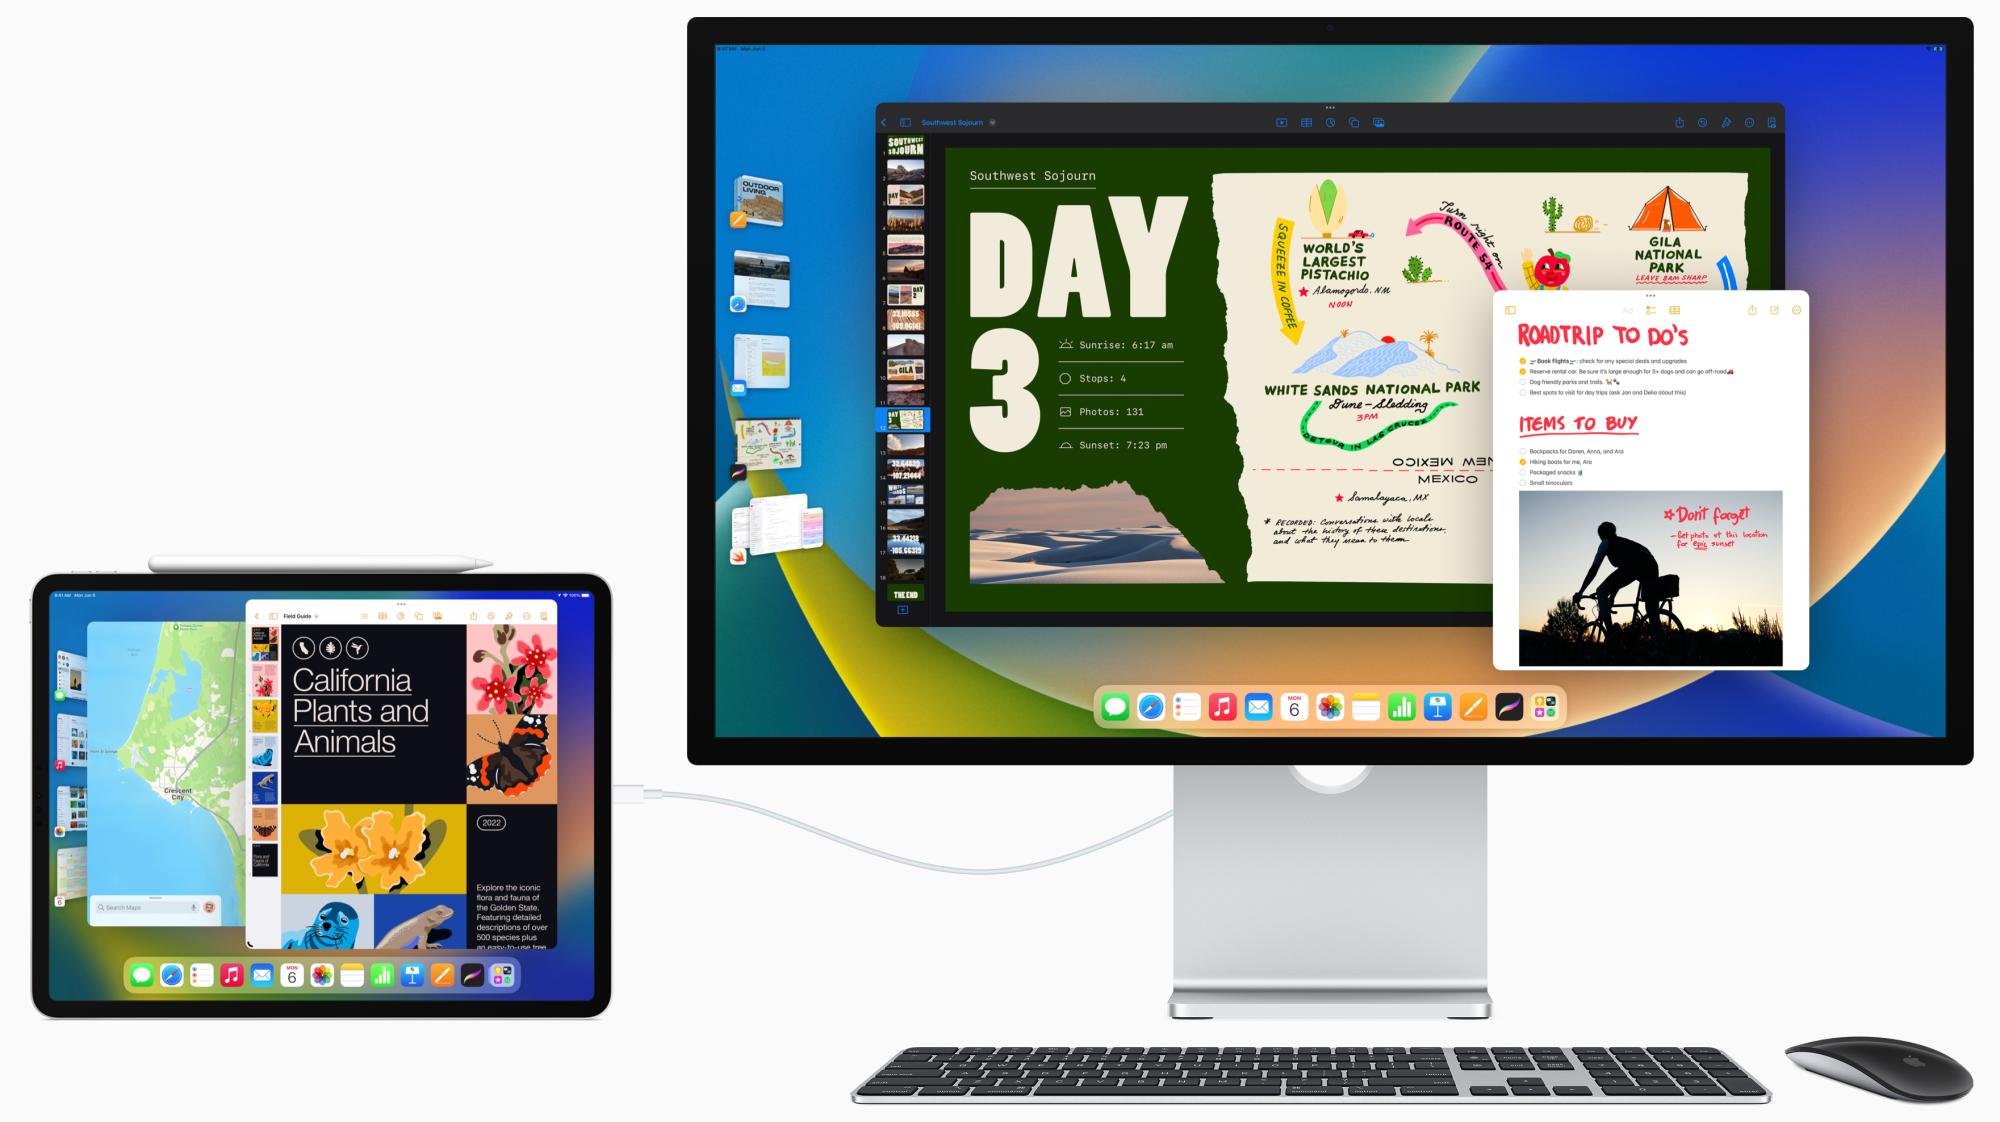 Mac Screen: Multitasking on Mac: Know how to perfectly use Split Screen  Mode - The Economic Times